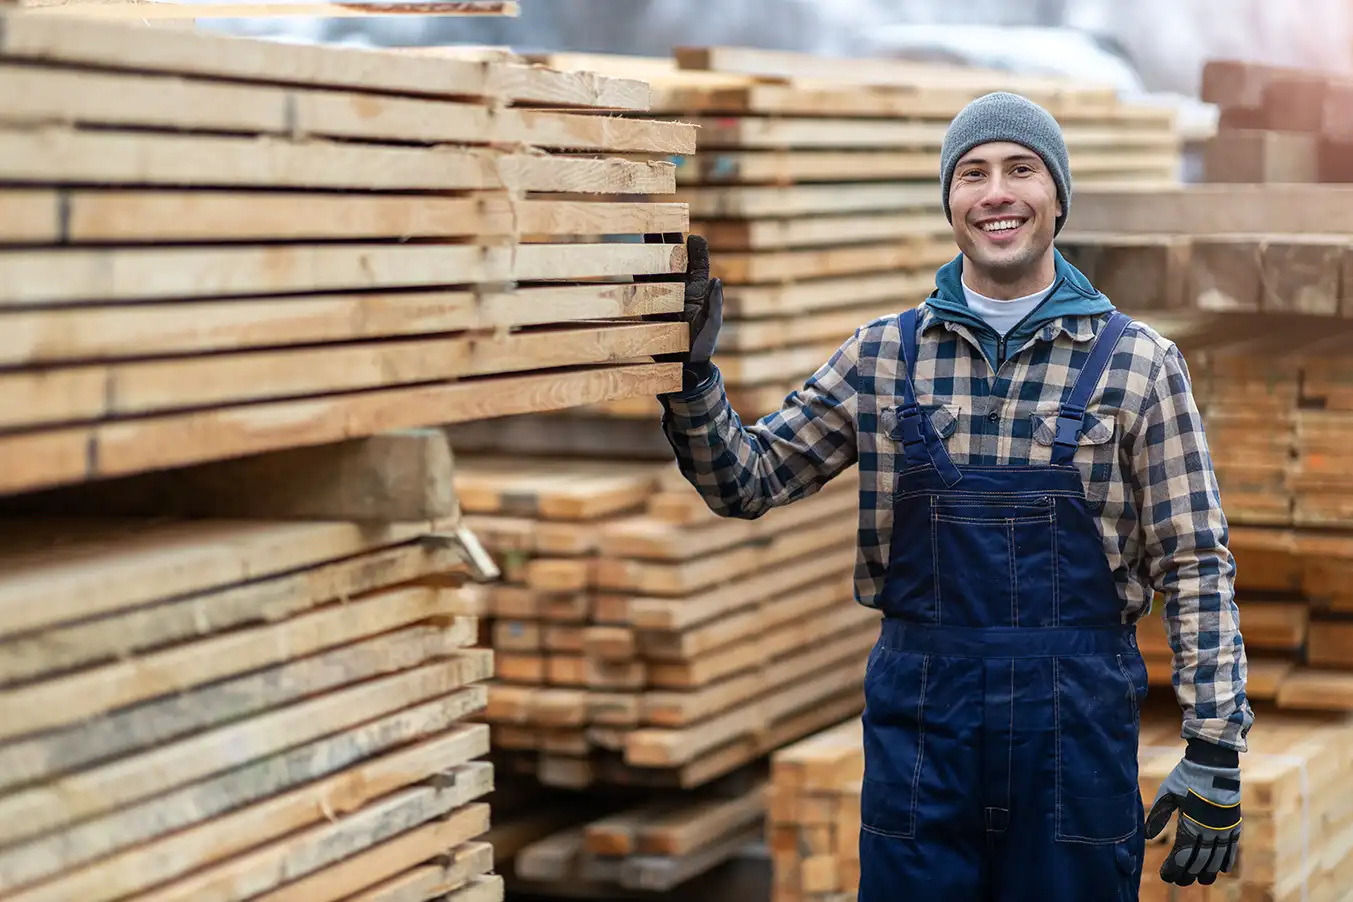 Smiling lumberyard worker next to stacks of construction boards